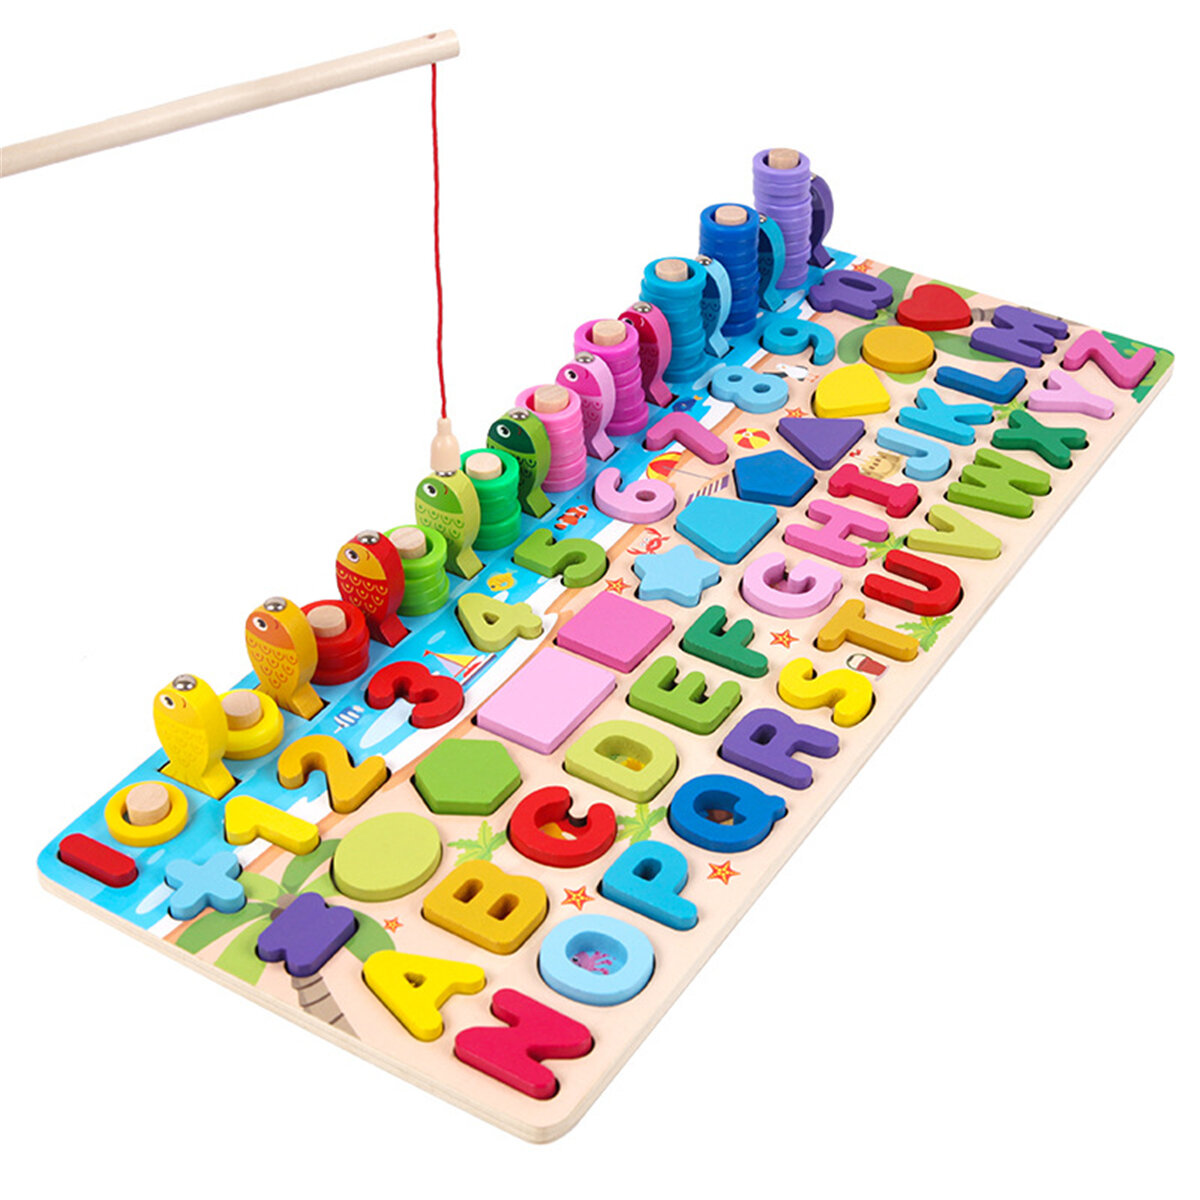 6 IN 1 Wooden Numbers Graphics Fishing Game Letter Multi-function Matching Board Early Learning Education Toy for Kids G